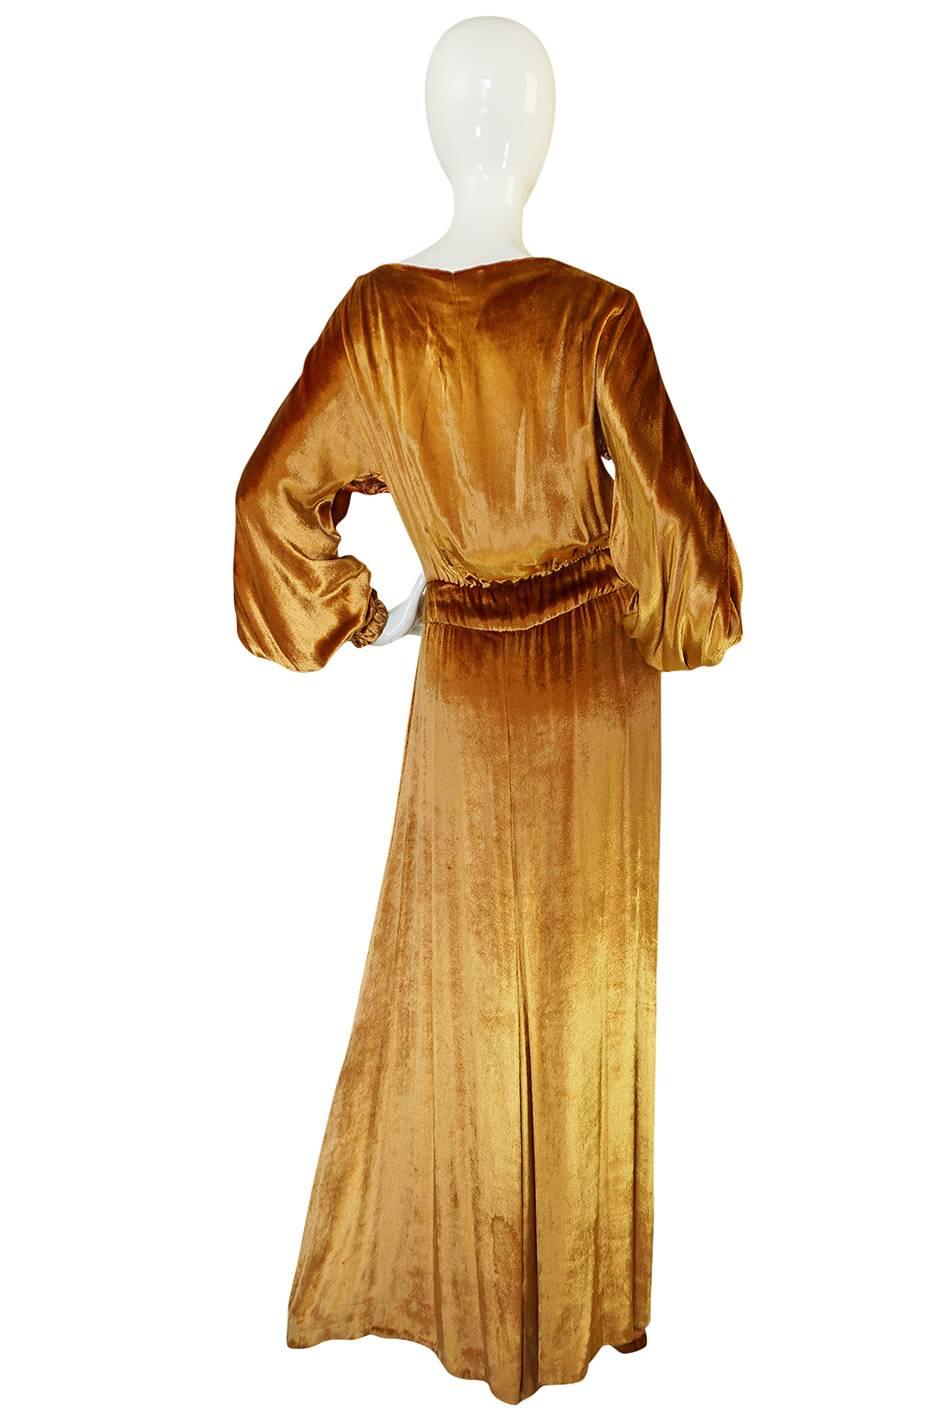 

This stunning and rare gown by one of the great couturiers is an absolute wonderful find and a true treasure. It is also incredibly beautiful and the fabric choice with its lush, liquid appearance only adds to that beauty. The color is a deep